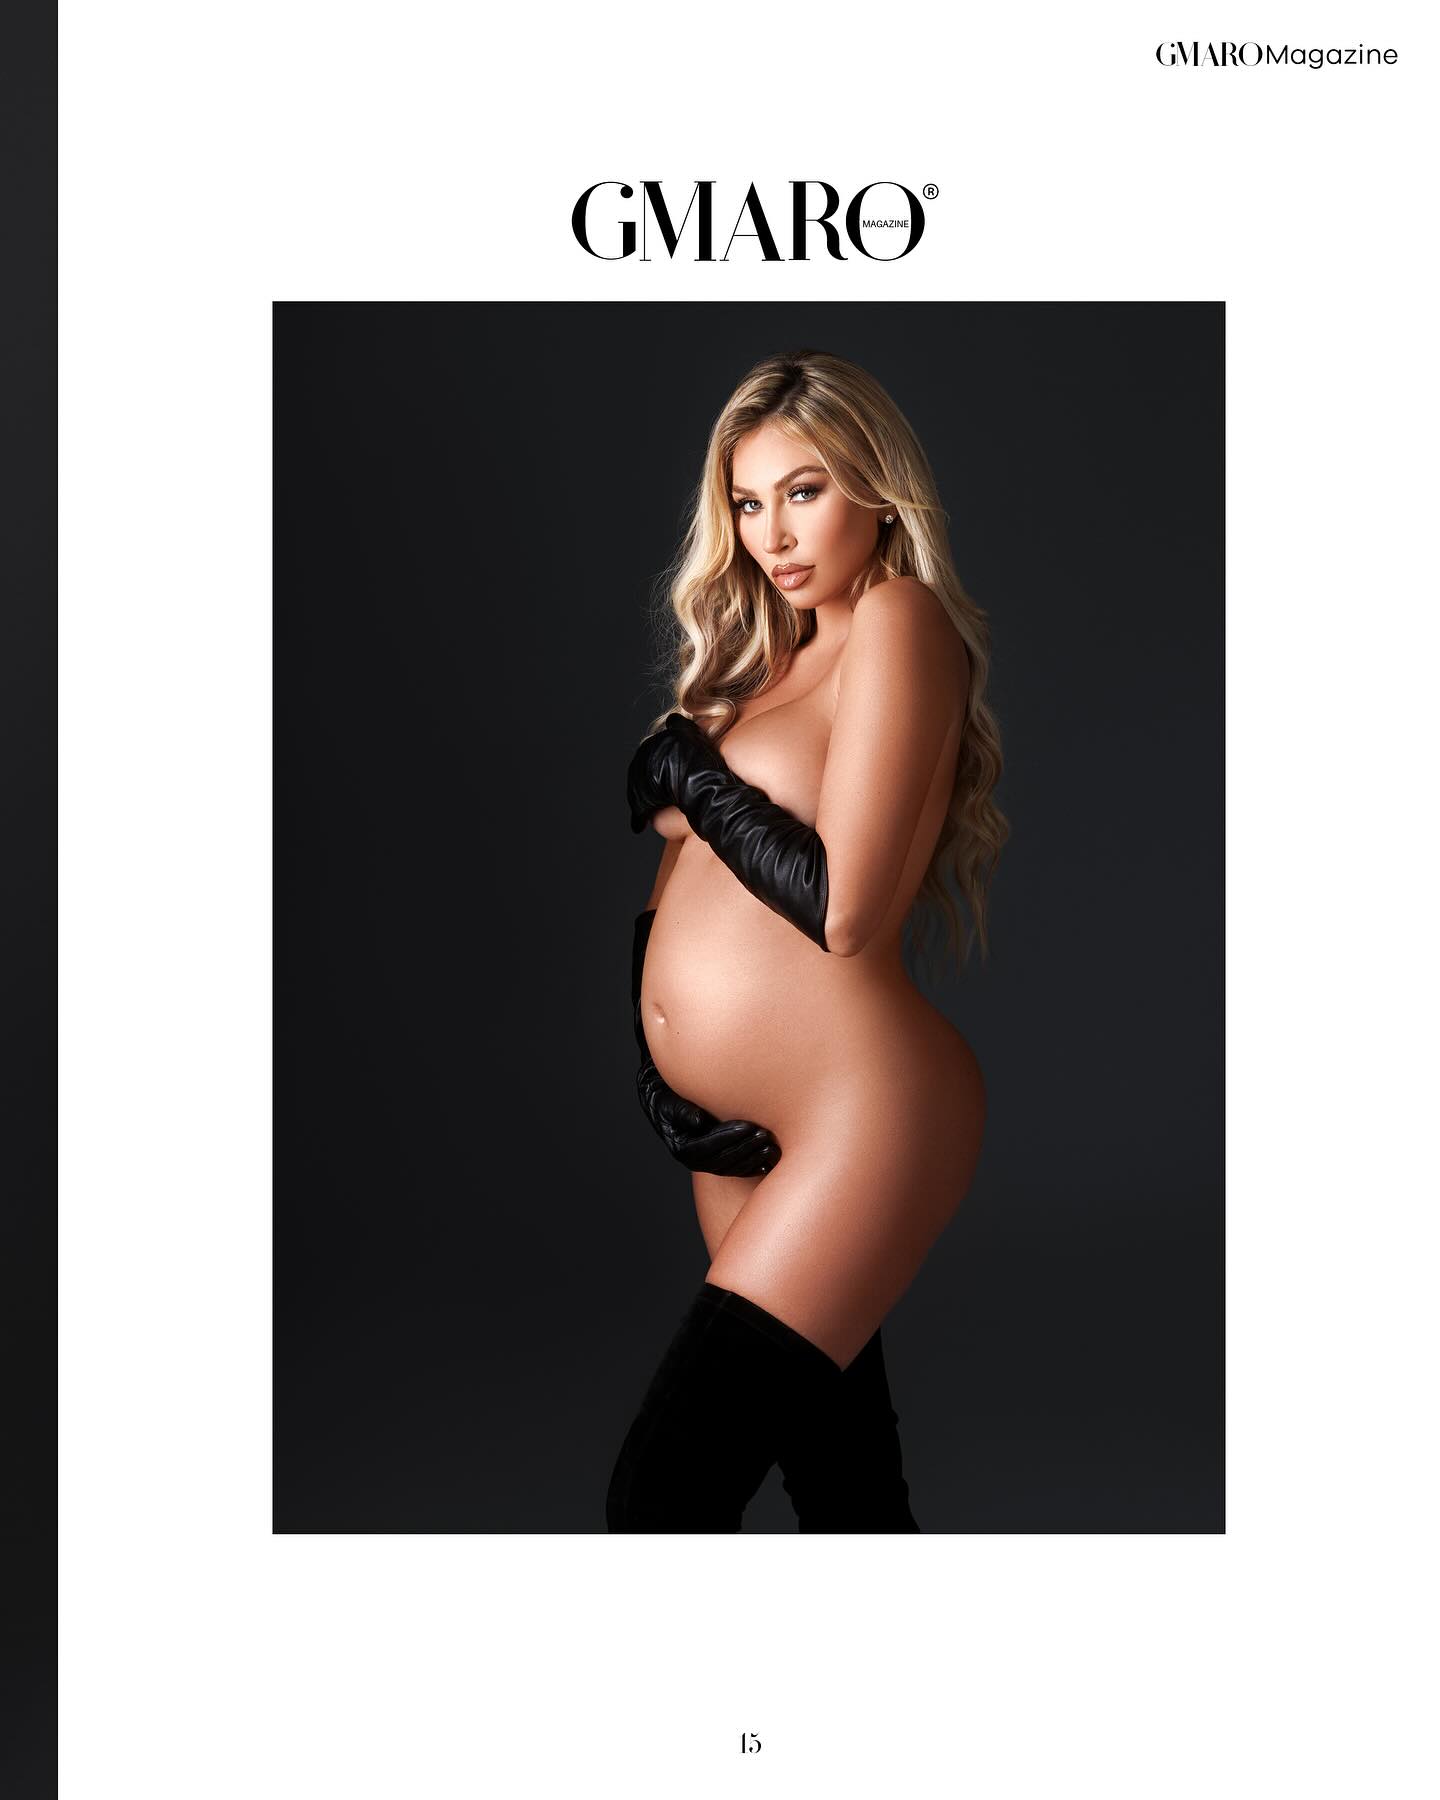 Beyonddd excited to share our new cover!!! 

Thank you @gmaromagazine 🤩

For Ocean, Yuki, I first ever cover! Shot by the amazing @oxanaalexphotography 

Glam @makeupgayane1 & @makeupbyadrianam 
Hair @peterhairbh 

Can’t even begin to explain how much this makes me miss my pregnancy, I truly LOVED being pregnant and can’t wait to do it again… 😂🤍